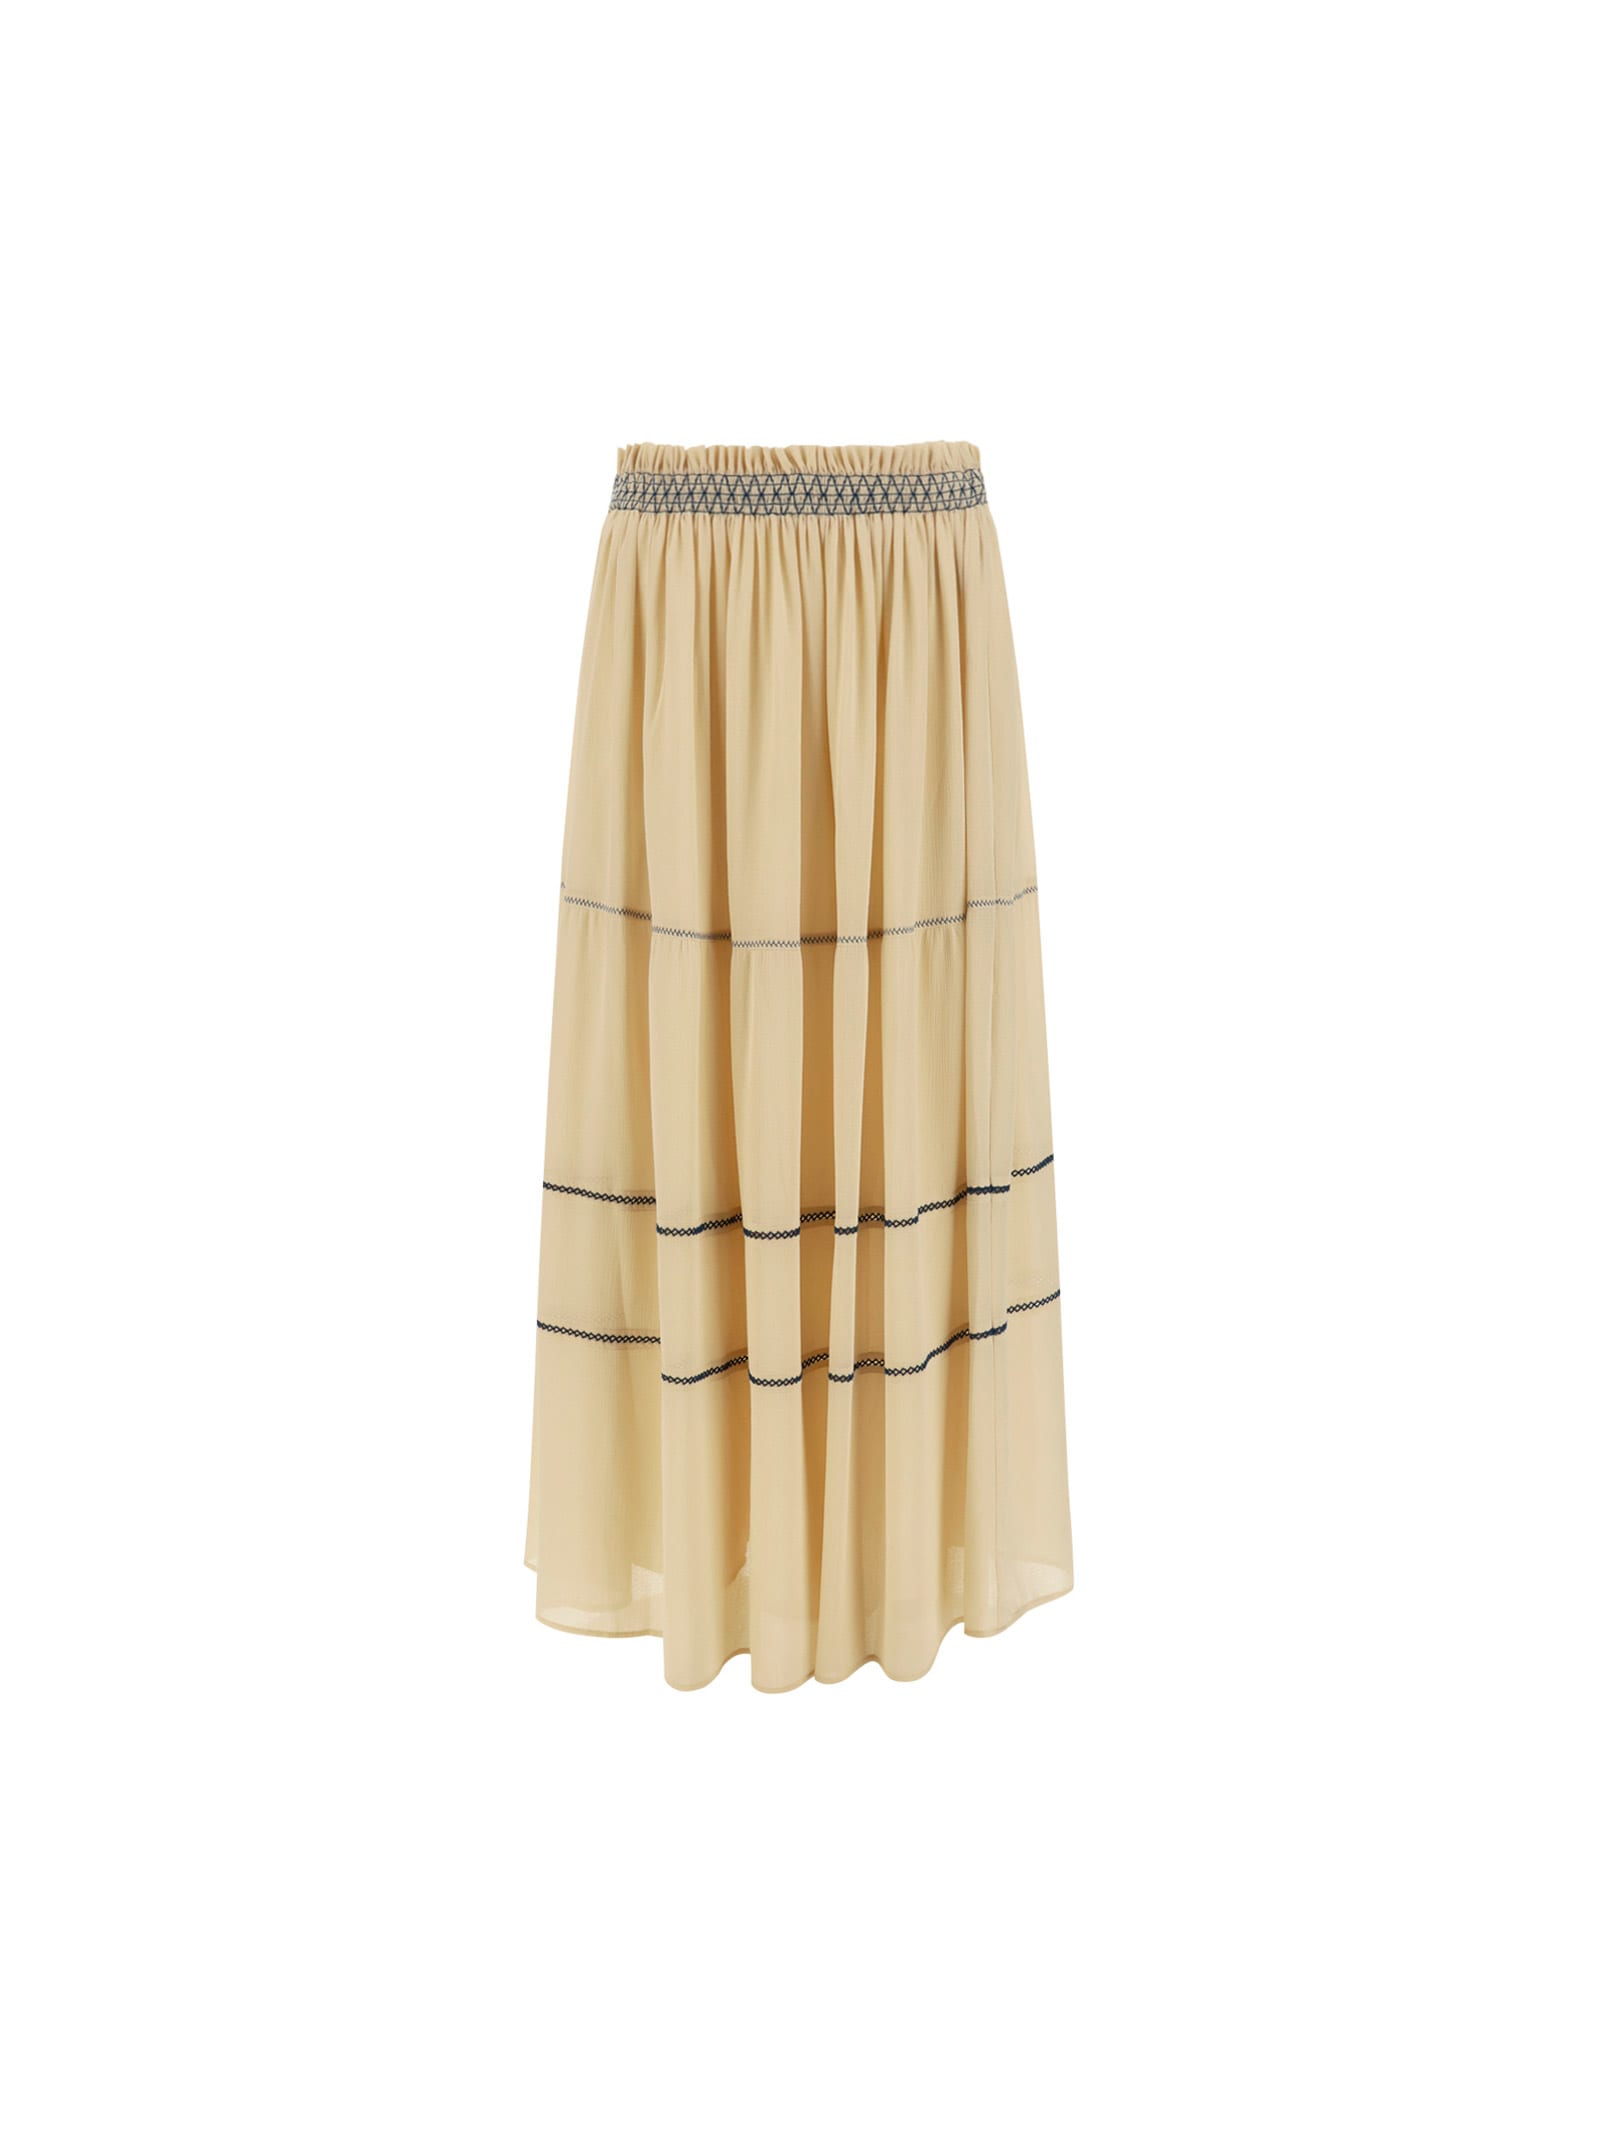 SEE BY CHLOÉ SKIRT